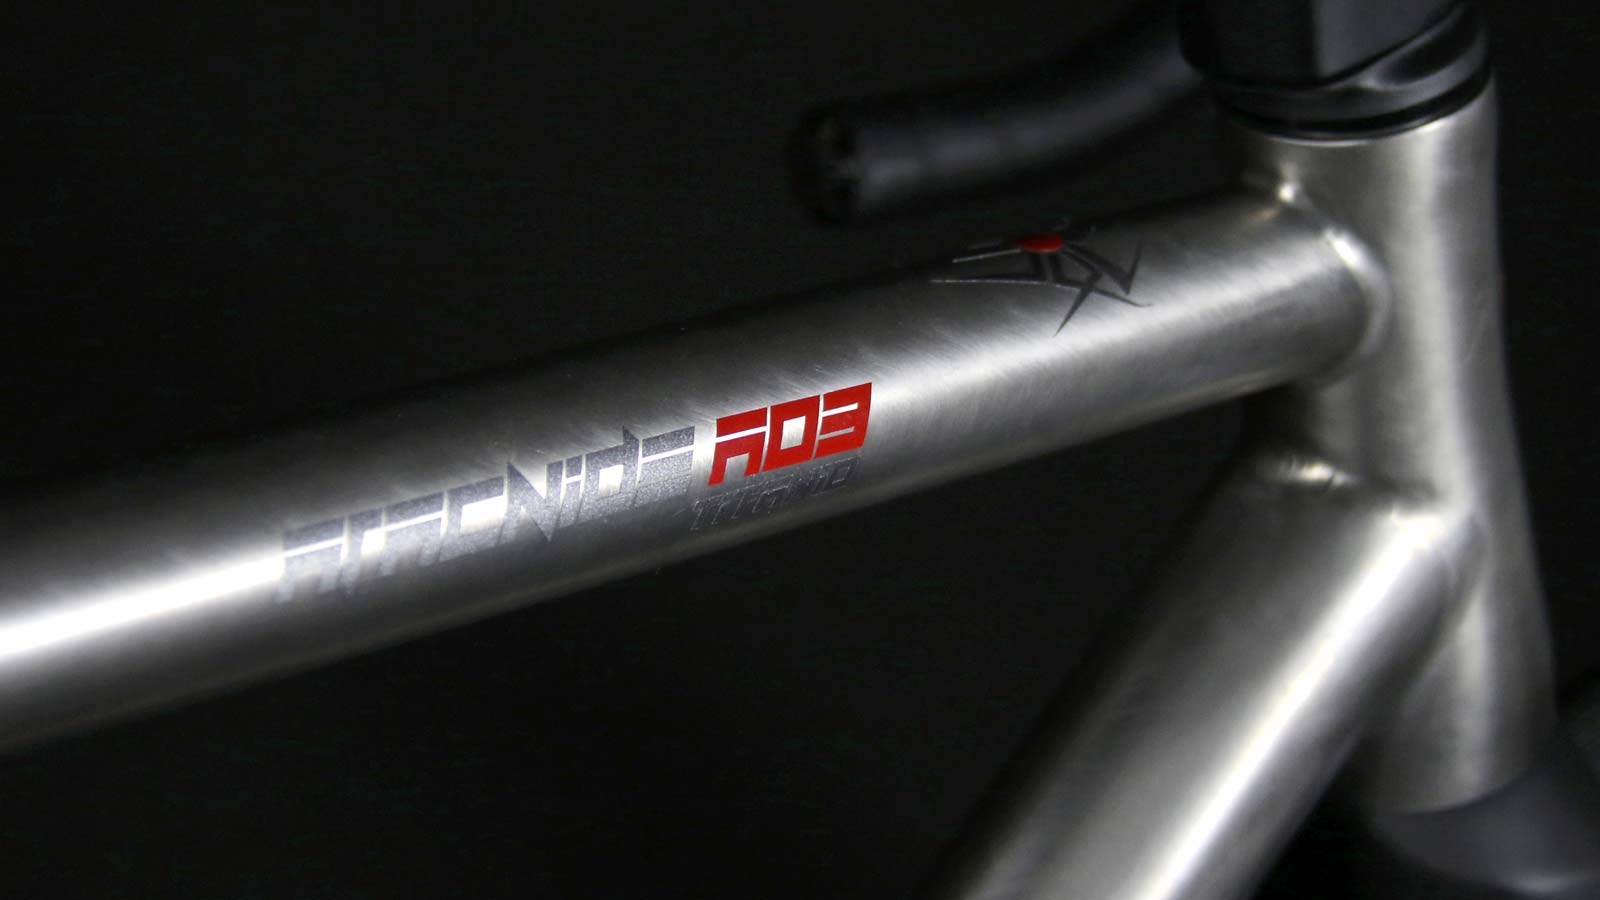 TRed Arcanide A03 Venti to road bike, fully-integrated internal cable routing custom titanium road bike, toptube